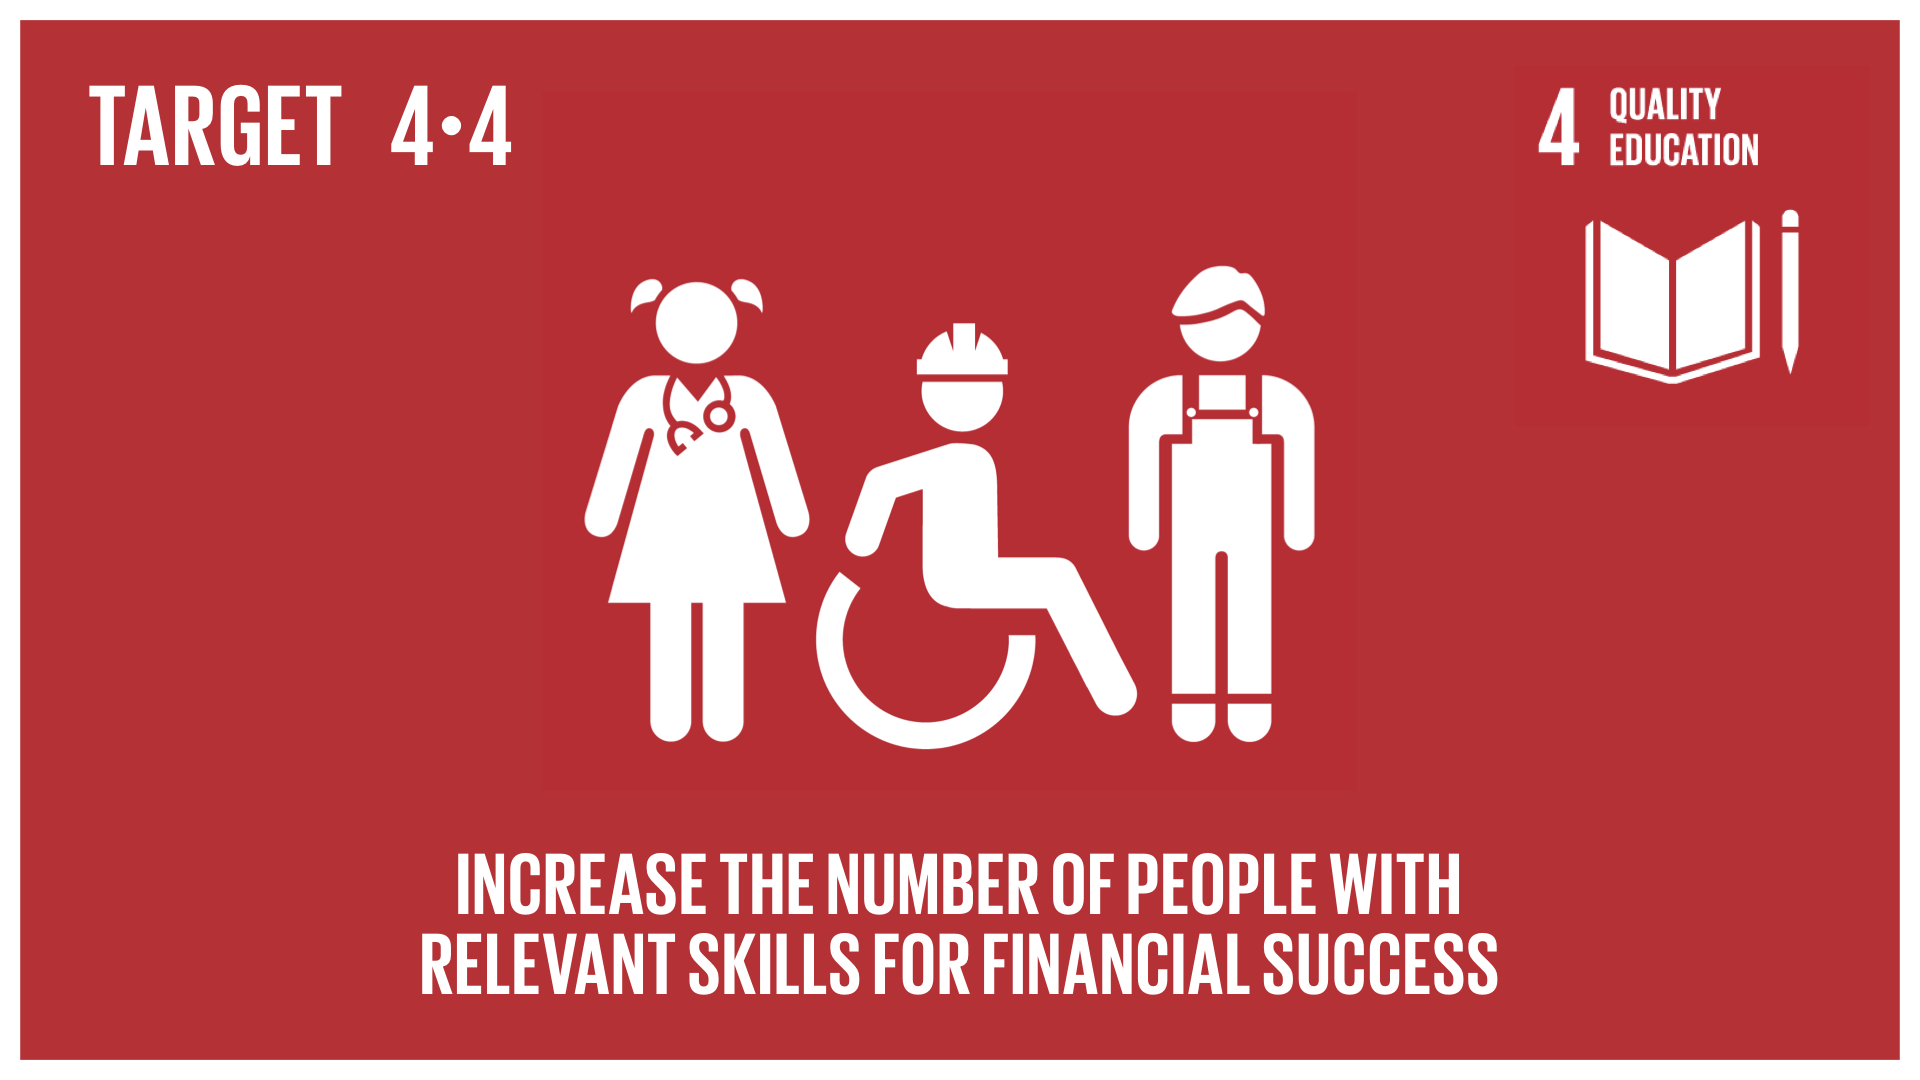 Graphic displaying an increase in the number of people with relevant skills for financial success